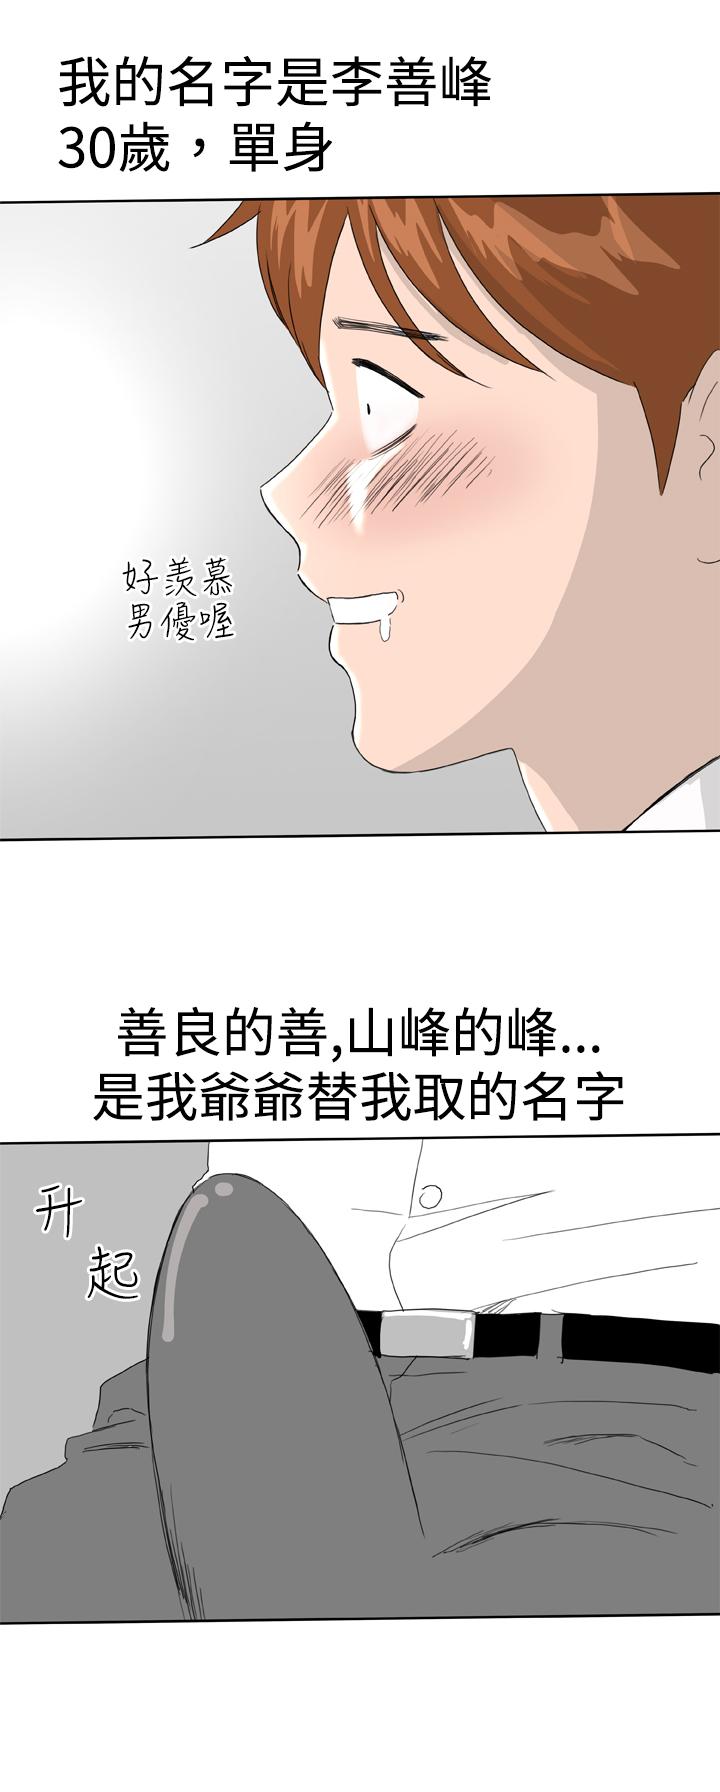 Deflowered [肆壹零]Dream Girl Ch.1~5 [Chinese]中文 1080p - Page 3